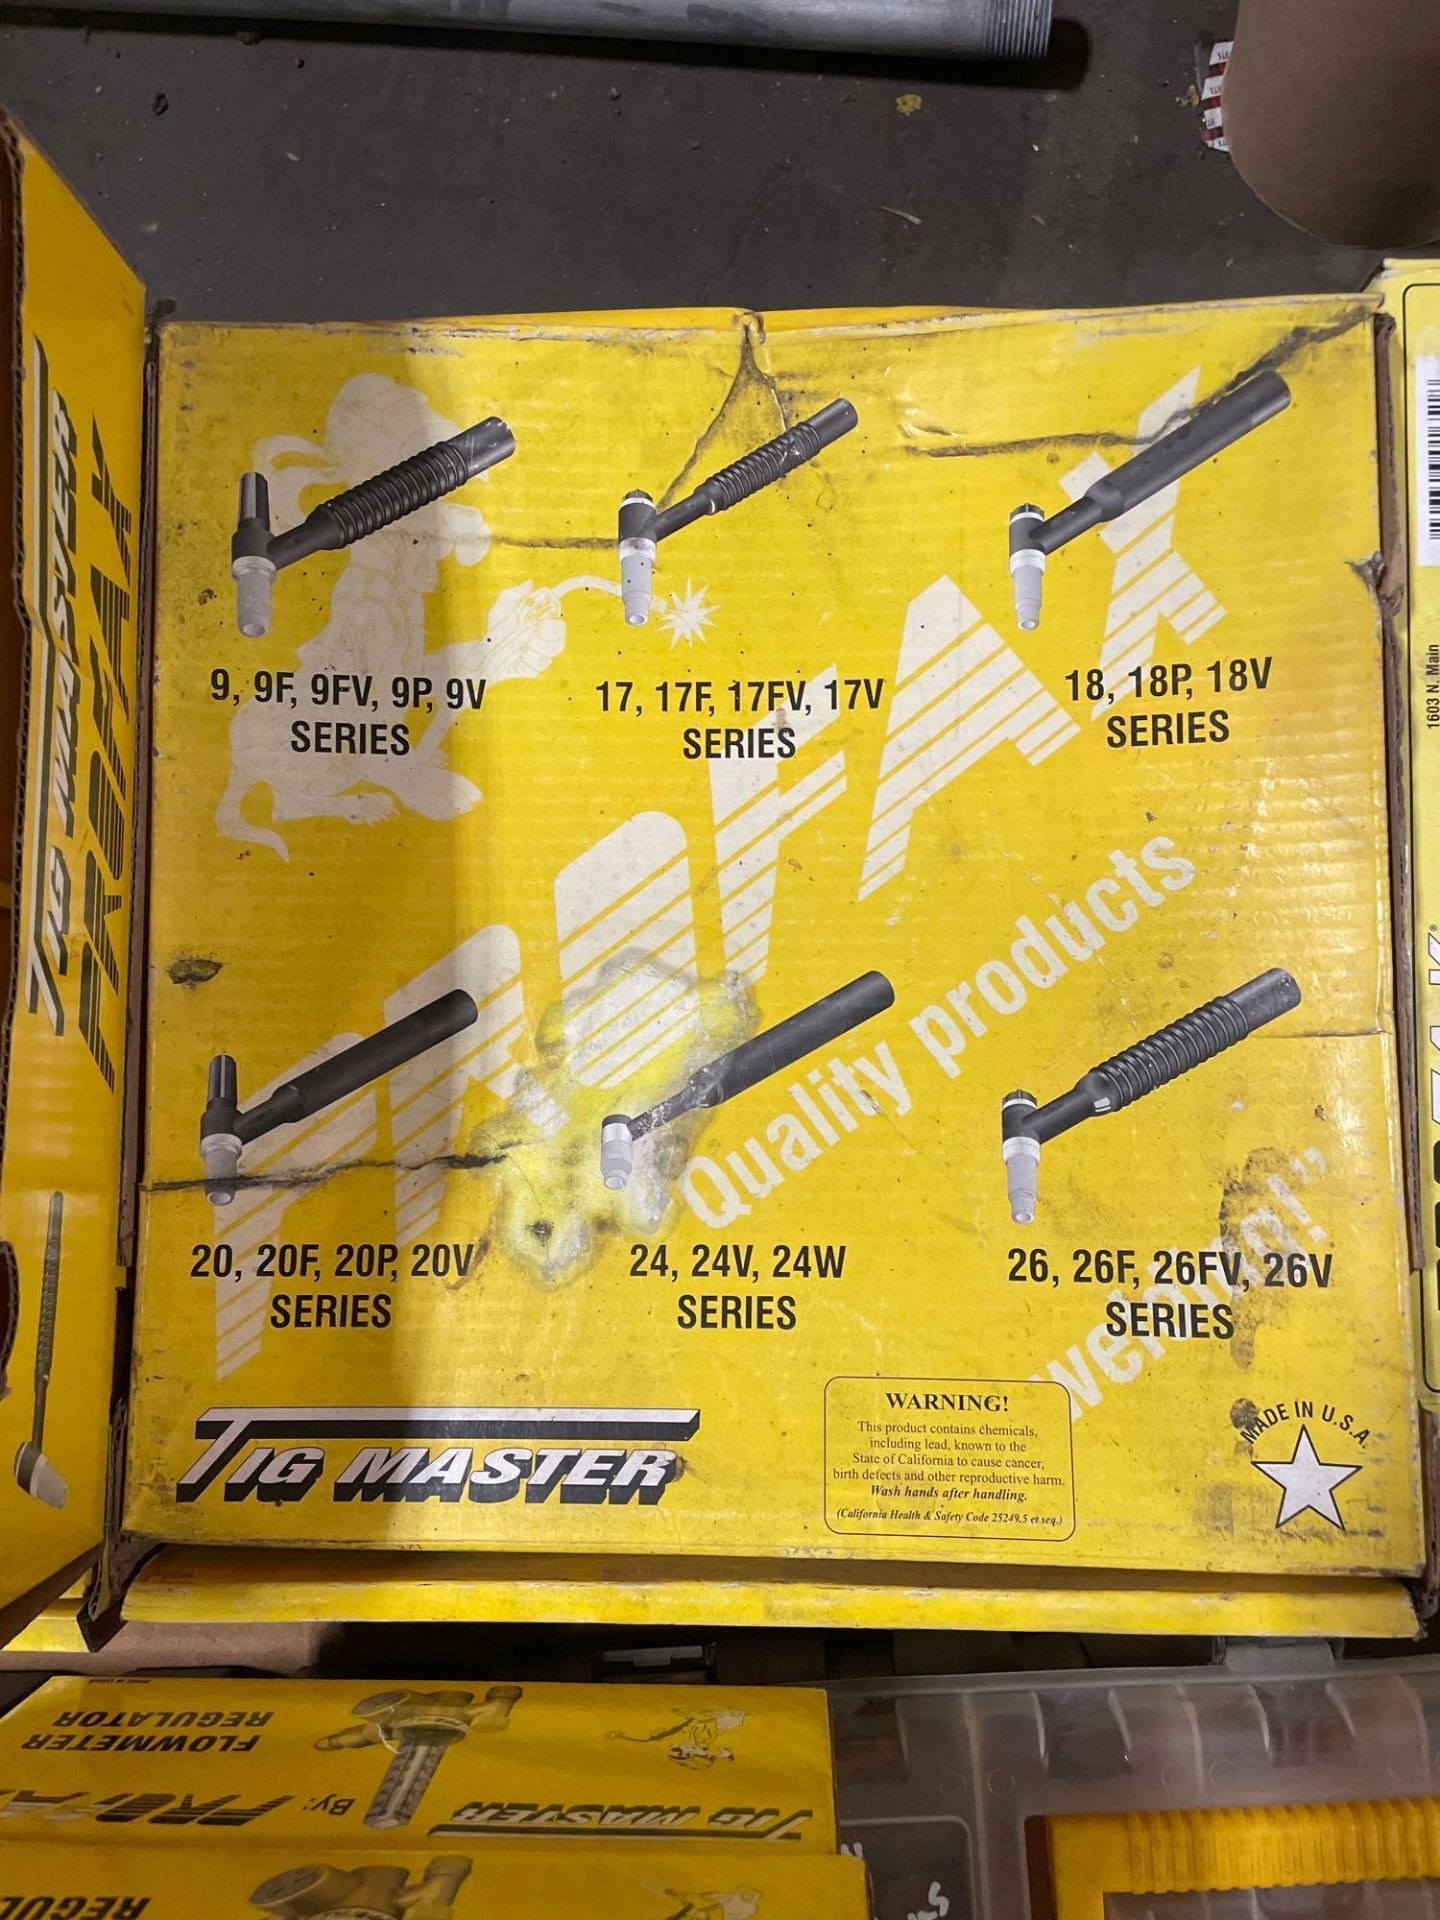 Pallet of New ProFax Equipment, Flowmaster Tips, Liner Wire, Tig Master Ceramic Nozzles - Image 12 of 16